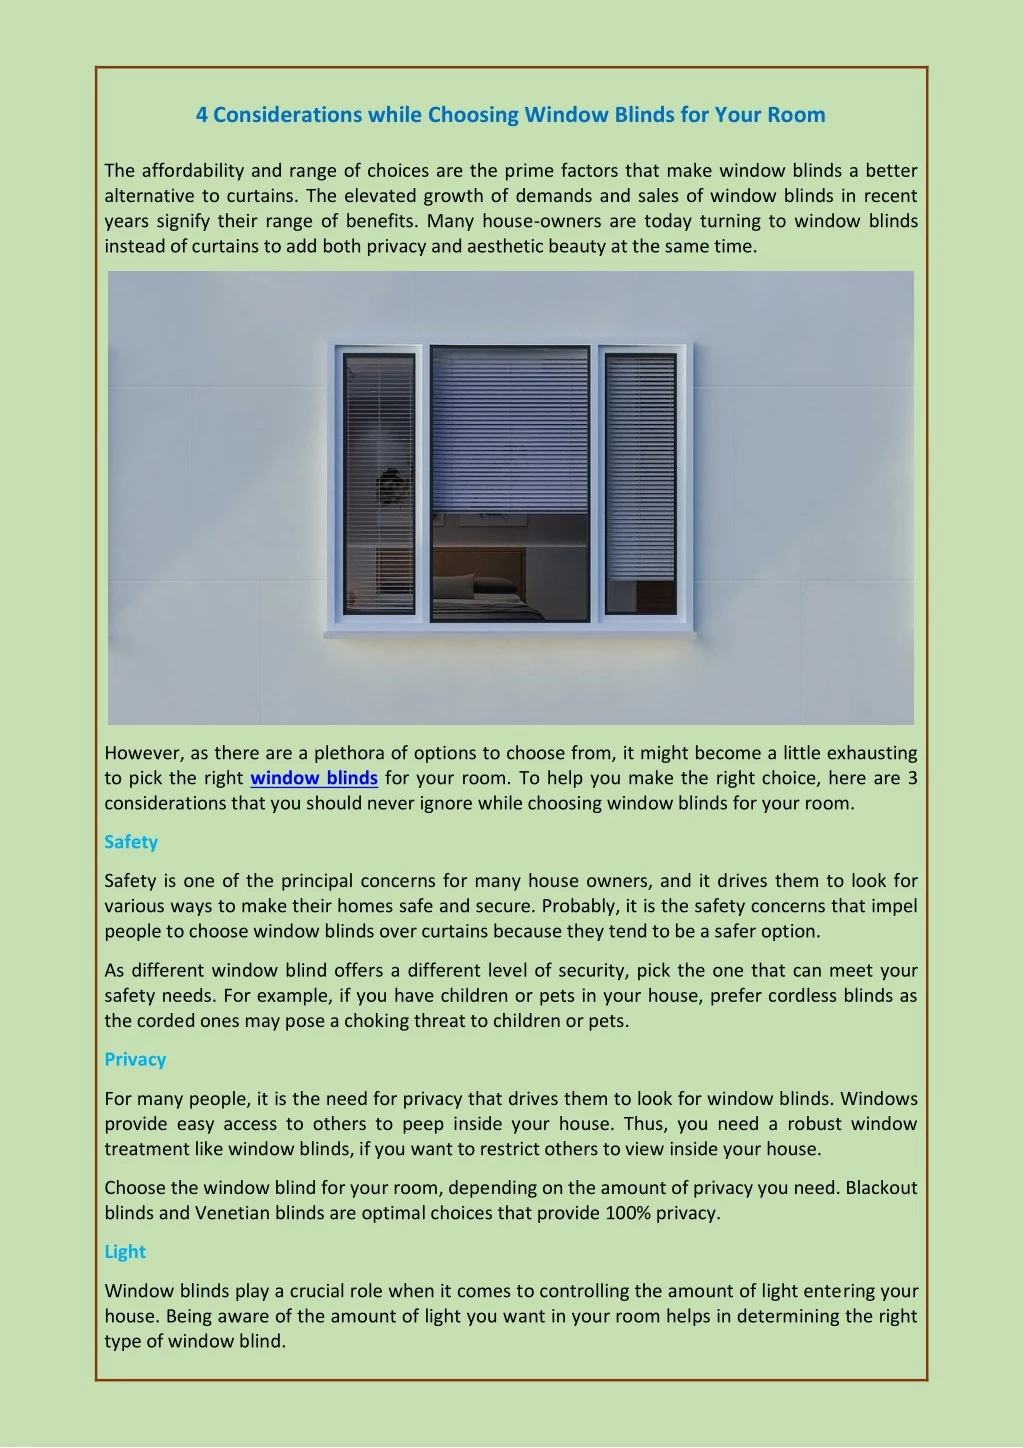 4 considerations while choosing window blinds